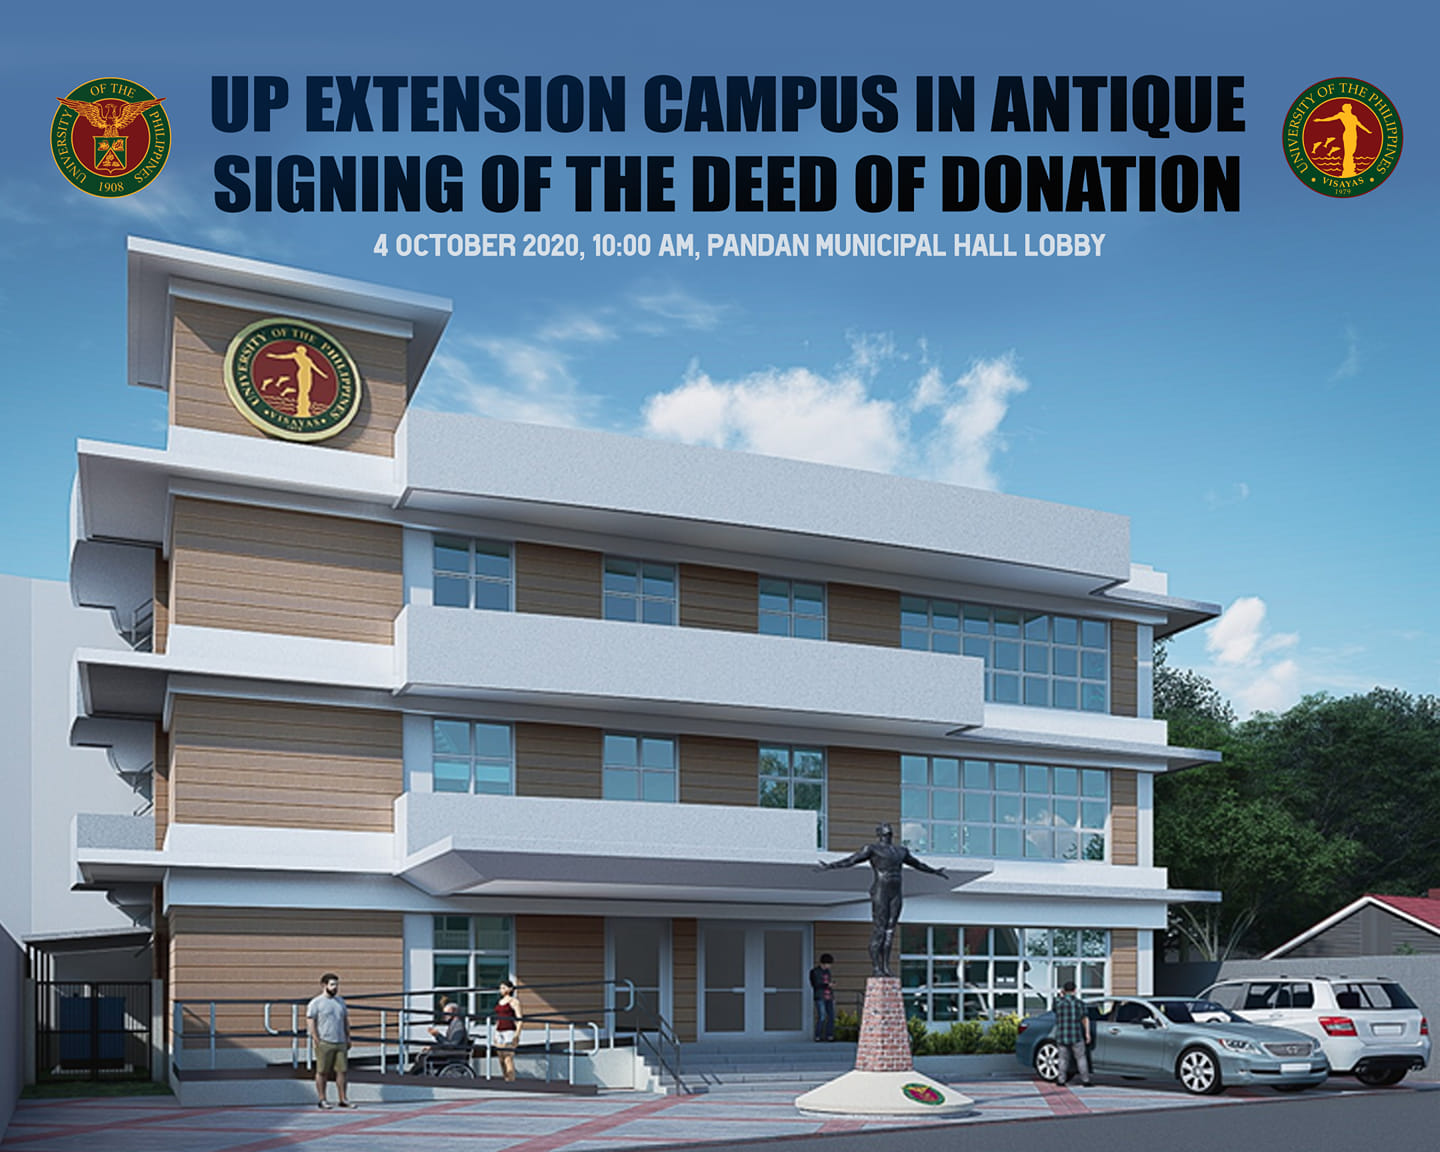 UP to officially mark its physical presence in Antique